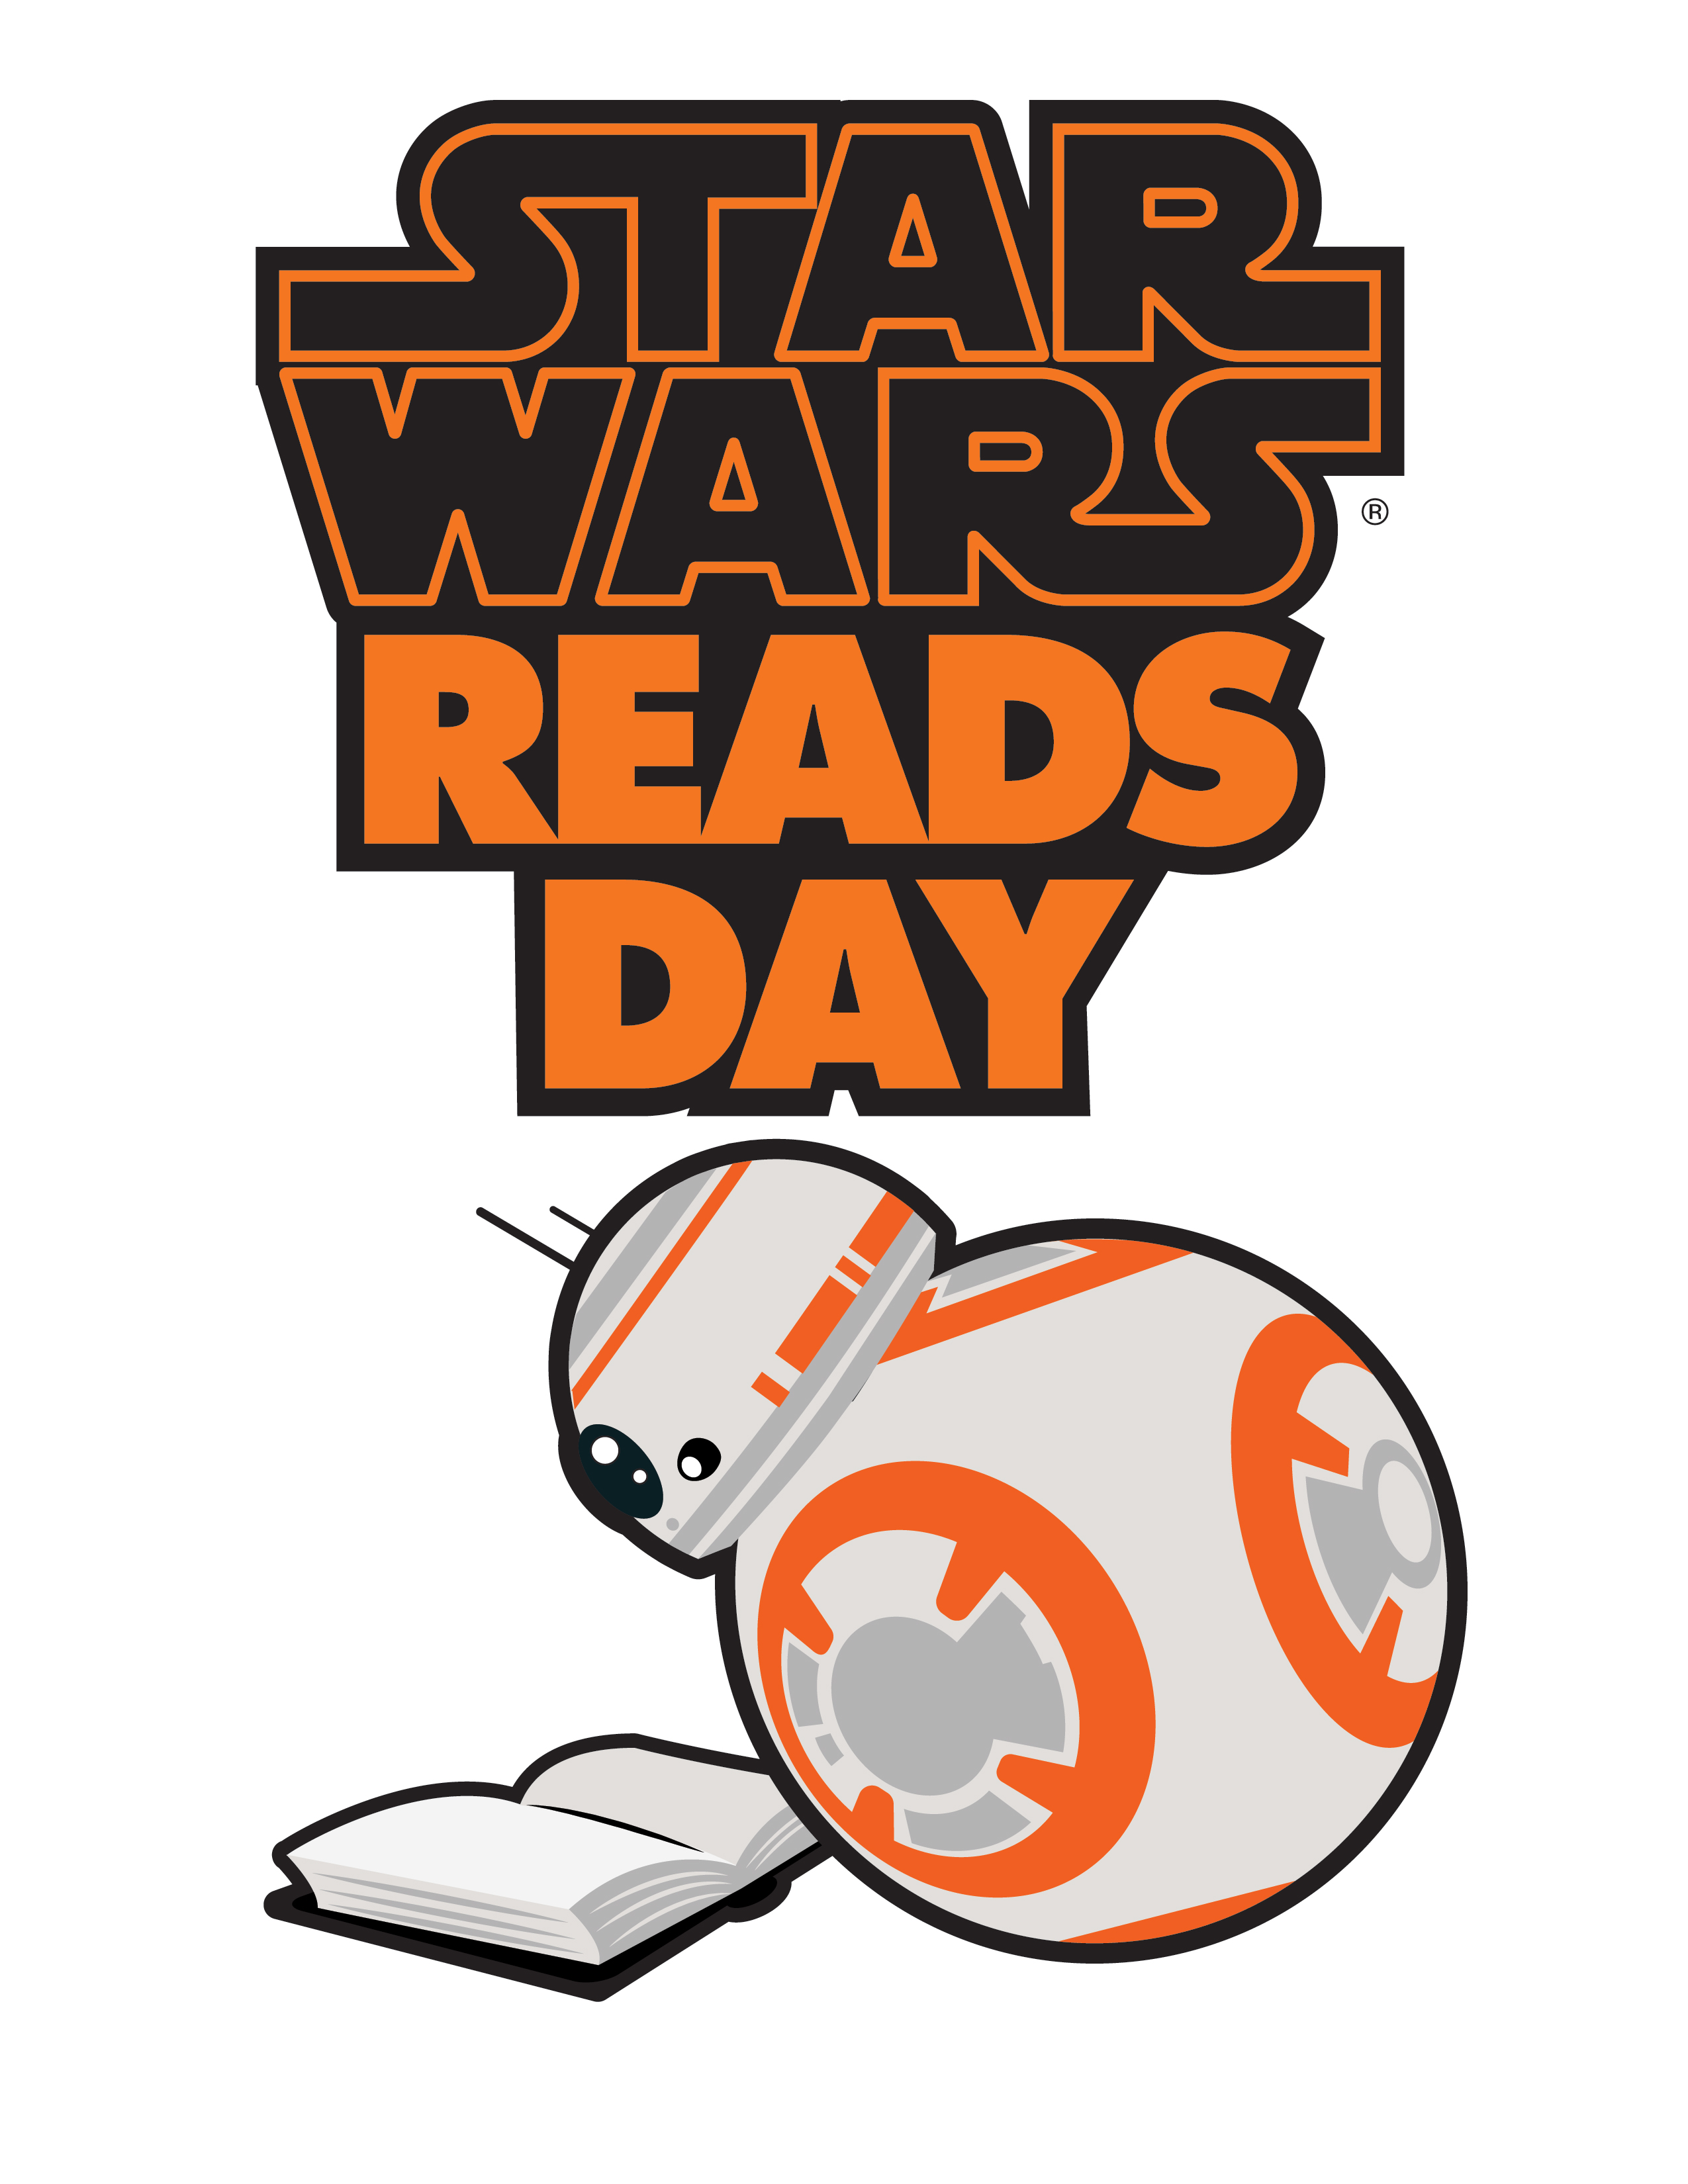 Star Wars Reads Day Free Activity Booklets UK